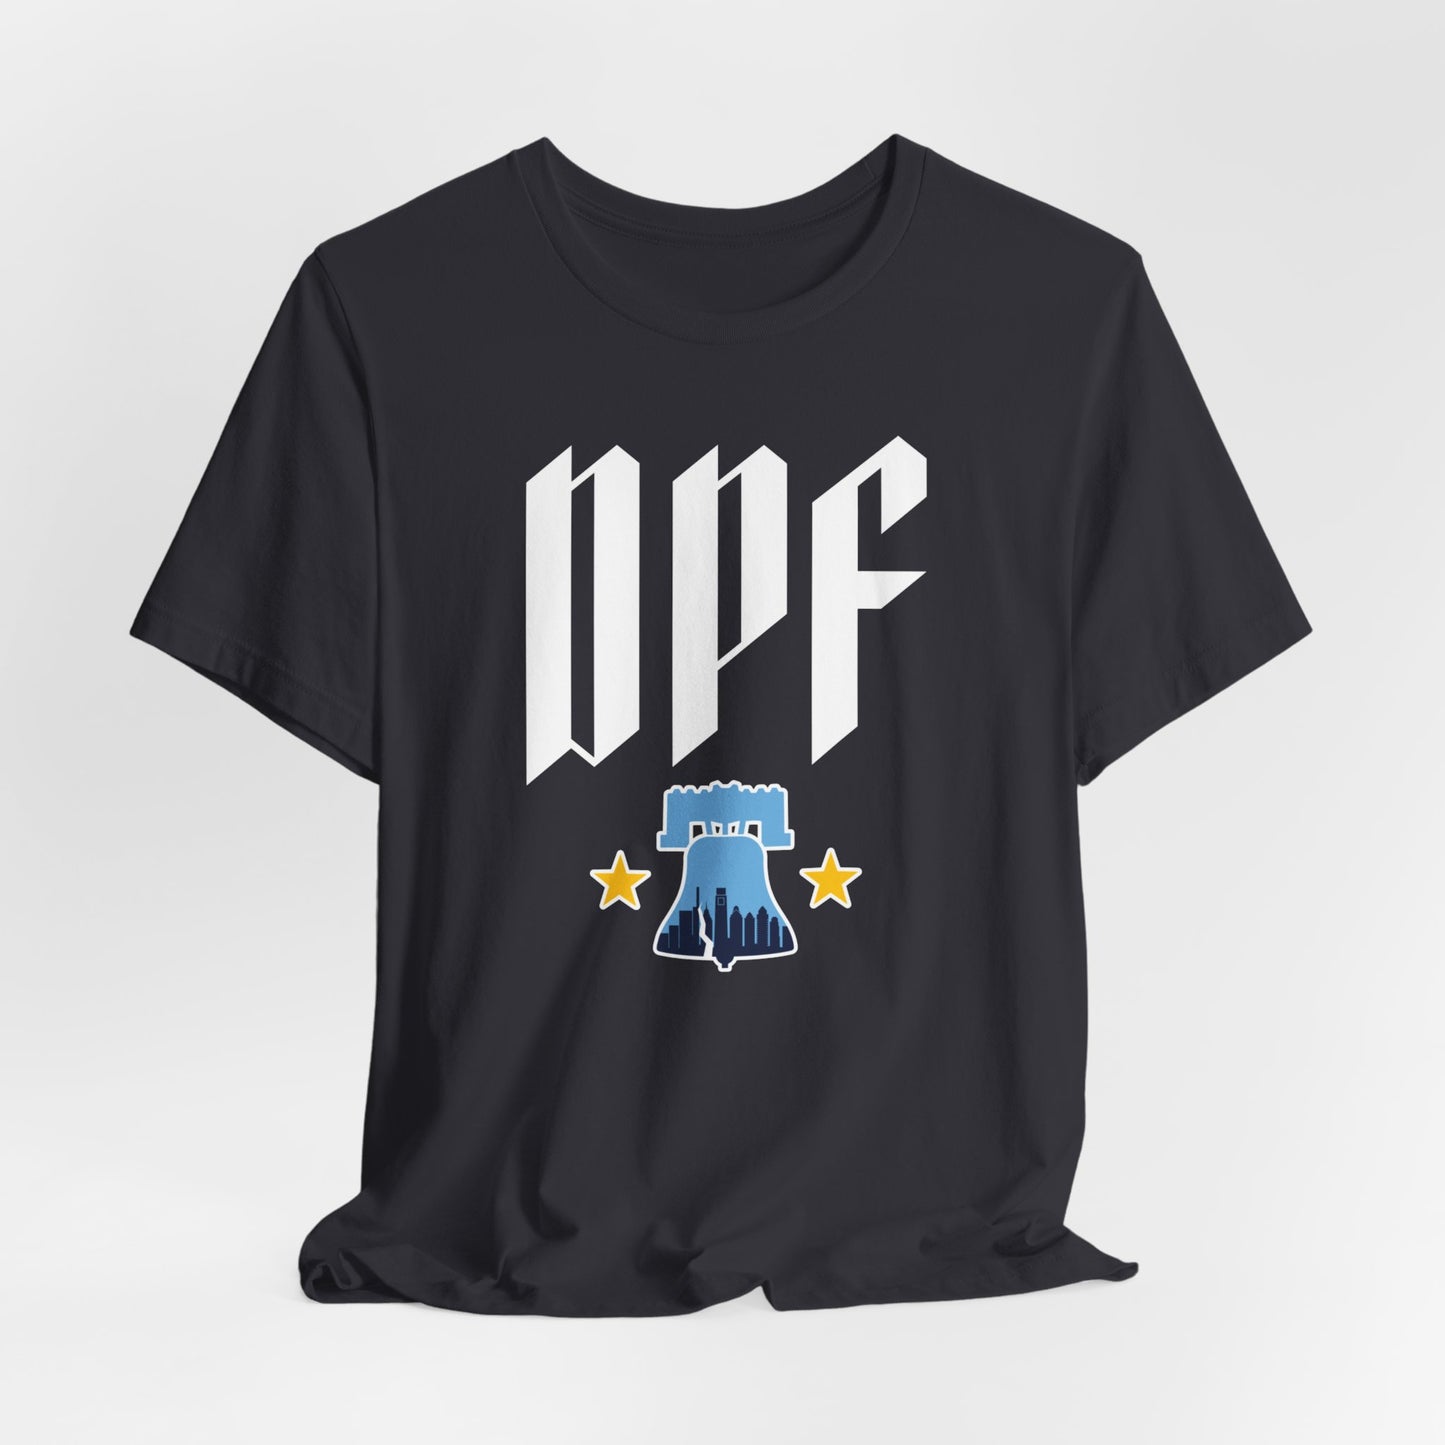 DPF City Connect Short Sleeve Tee